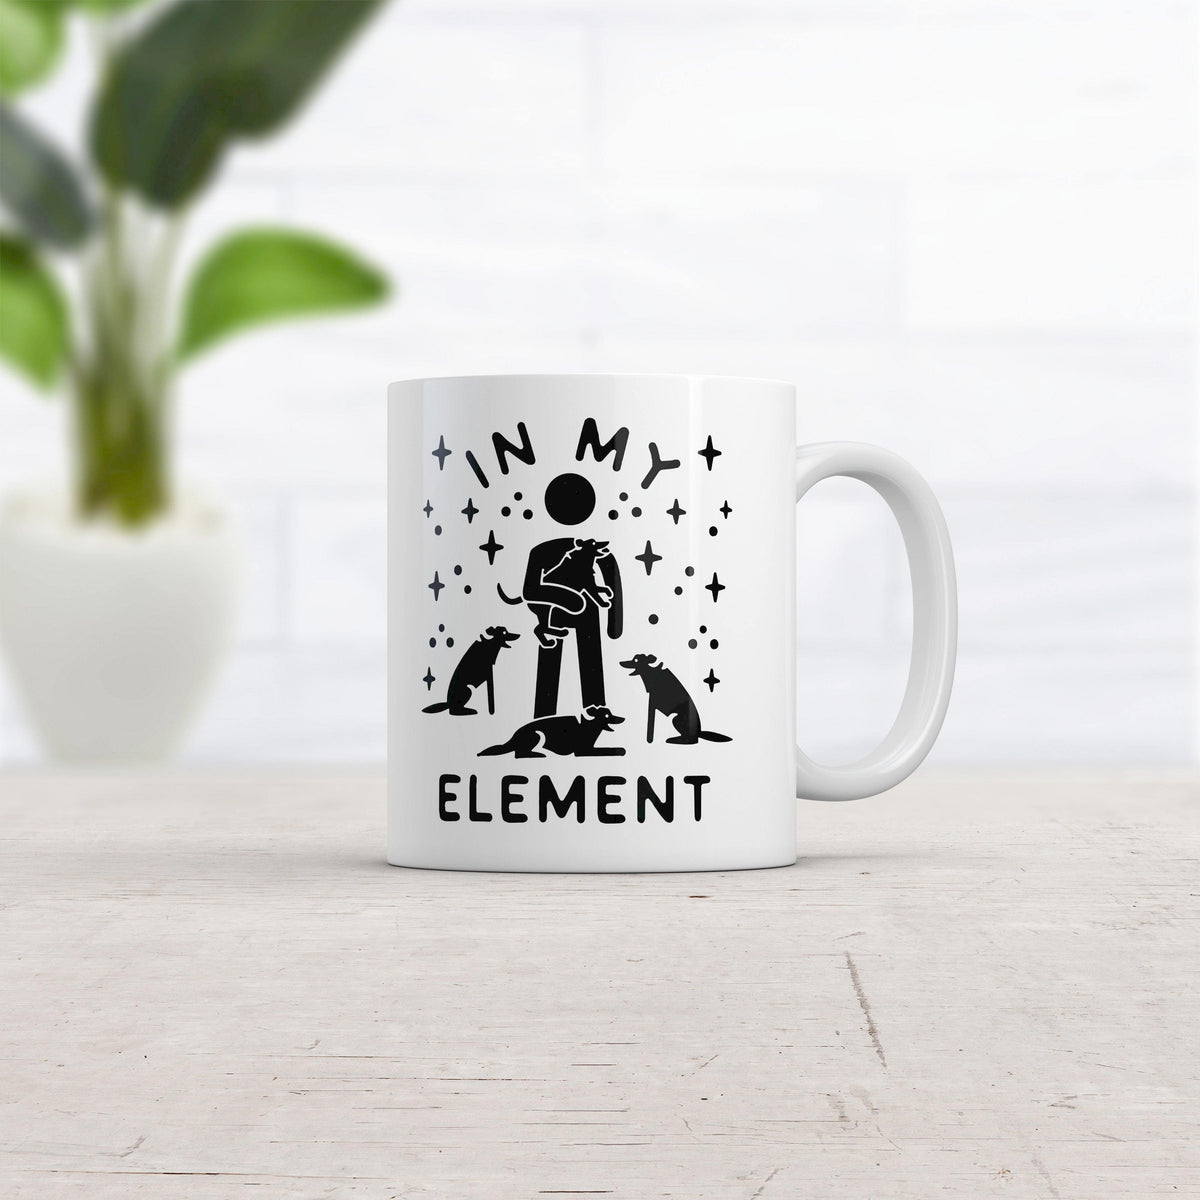 In My Element Dogs Mug Funny Dog Lover Pet Puppy Animal Novelty Coffee Cup-11oz  -  Crazy Dog T-Shirts